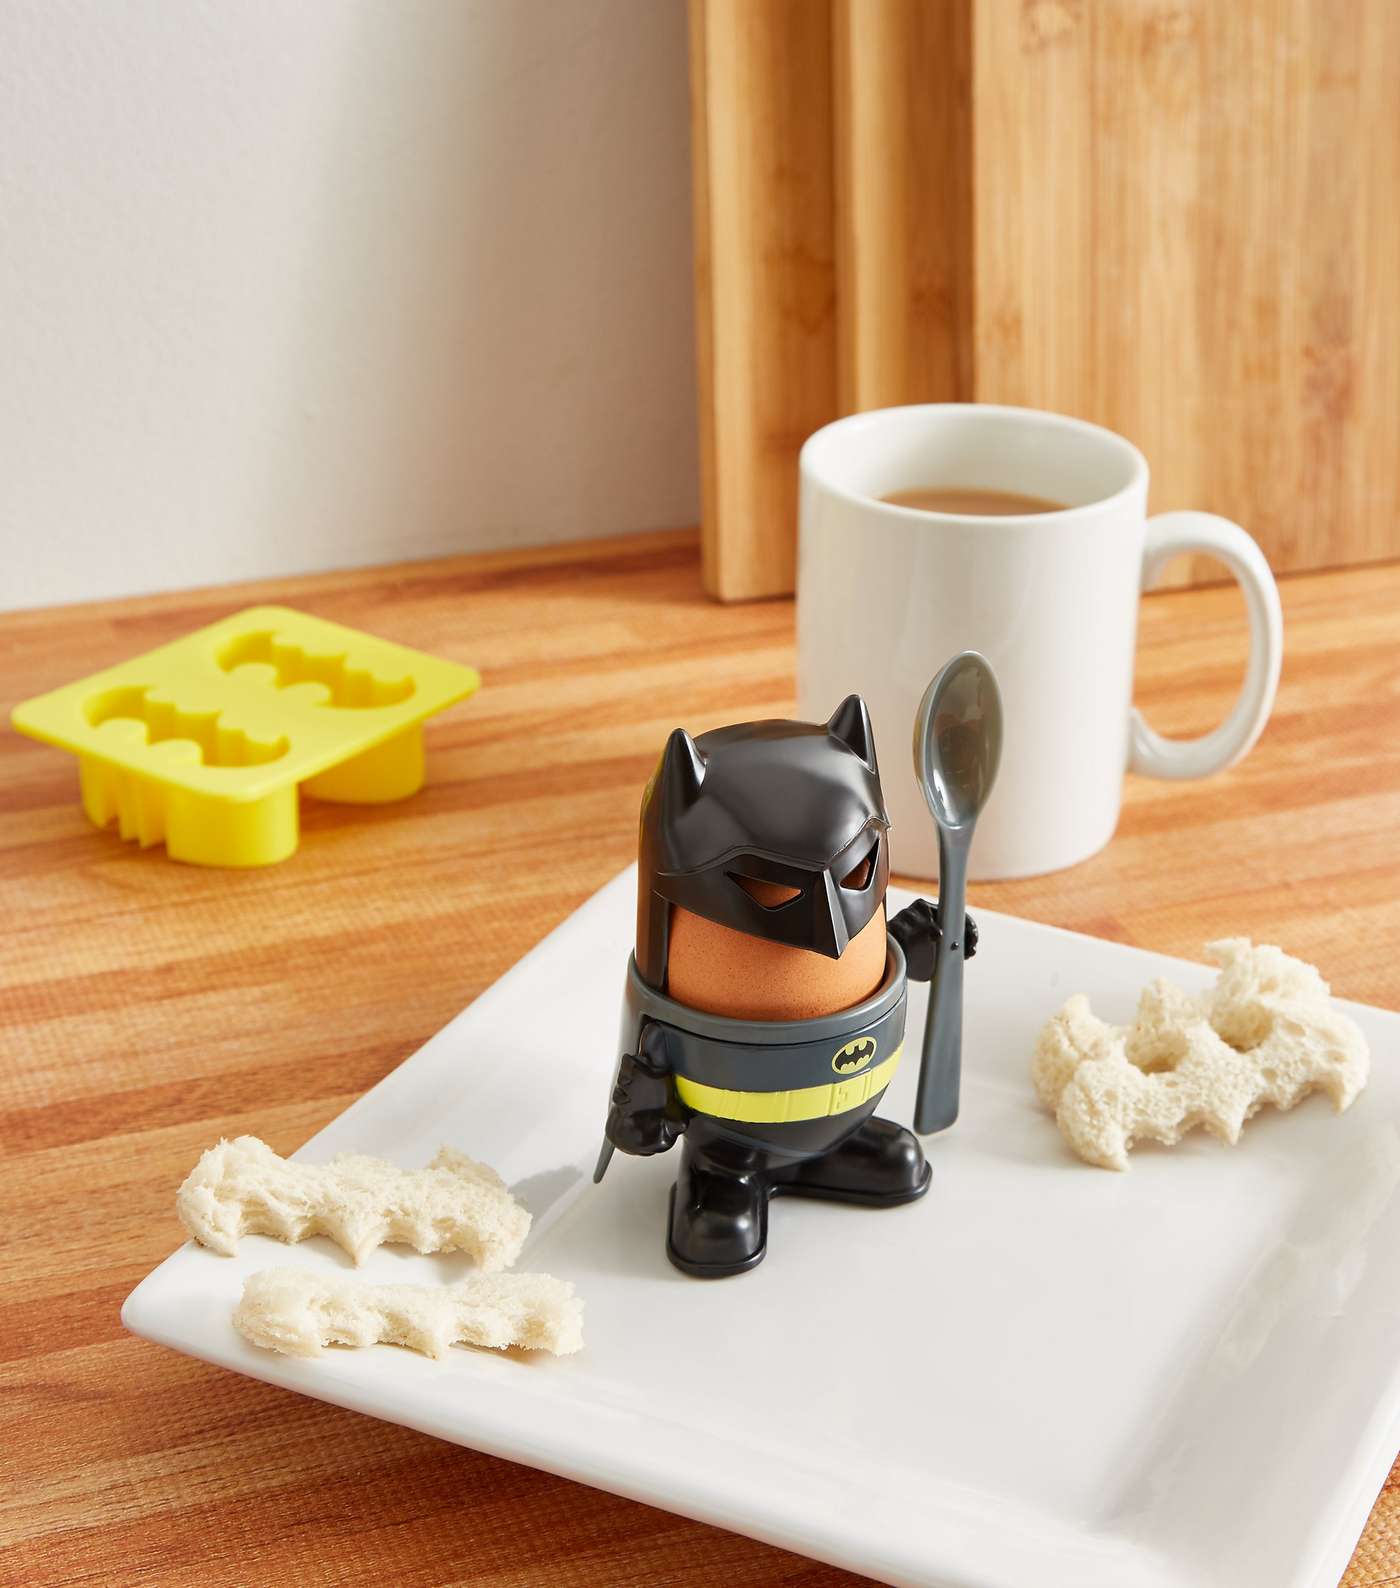 Black Batman Egg Cup and Toast Cutter Set Image 2